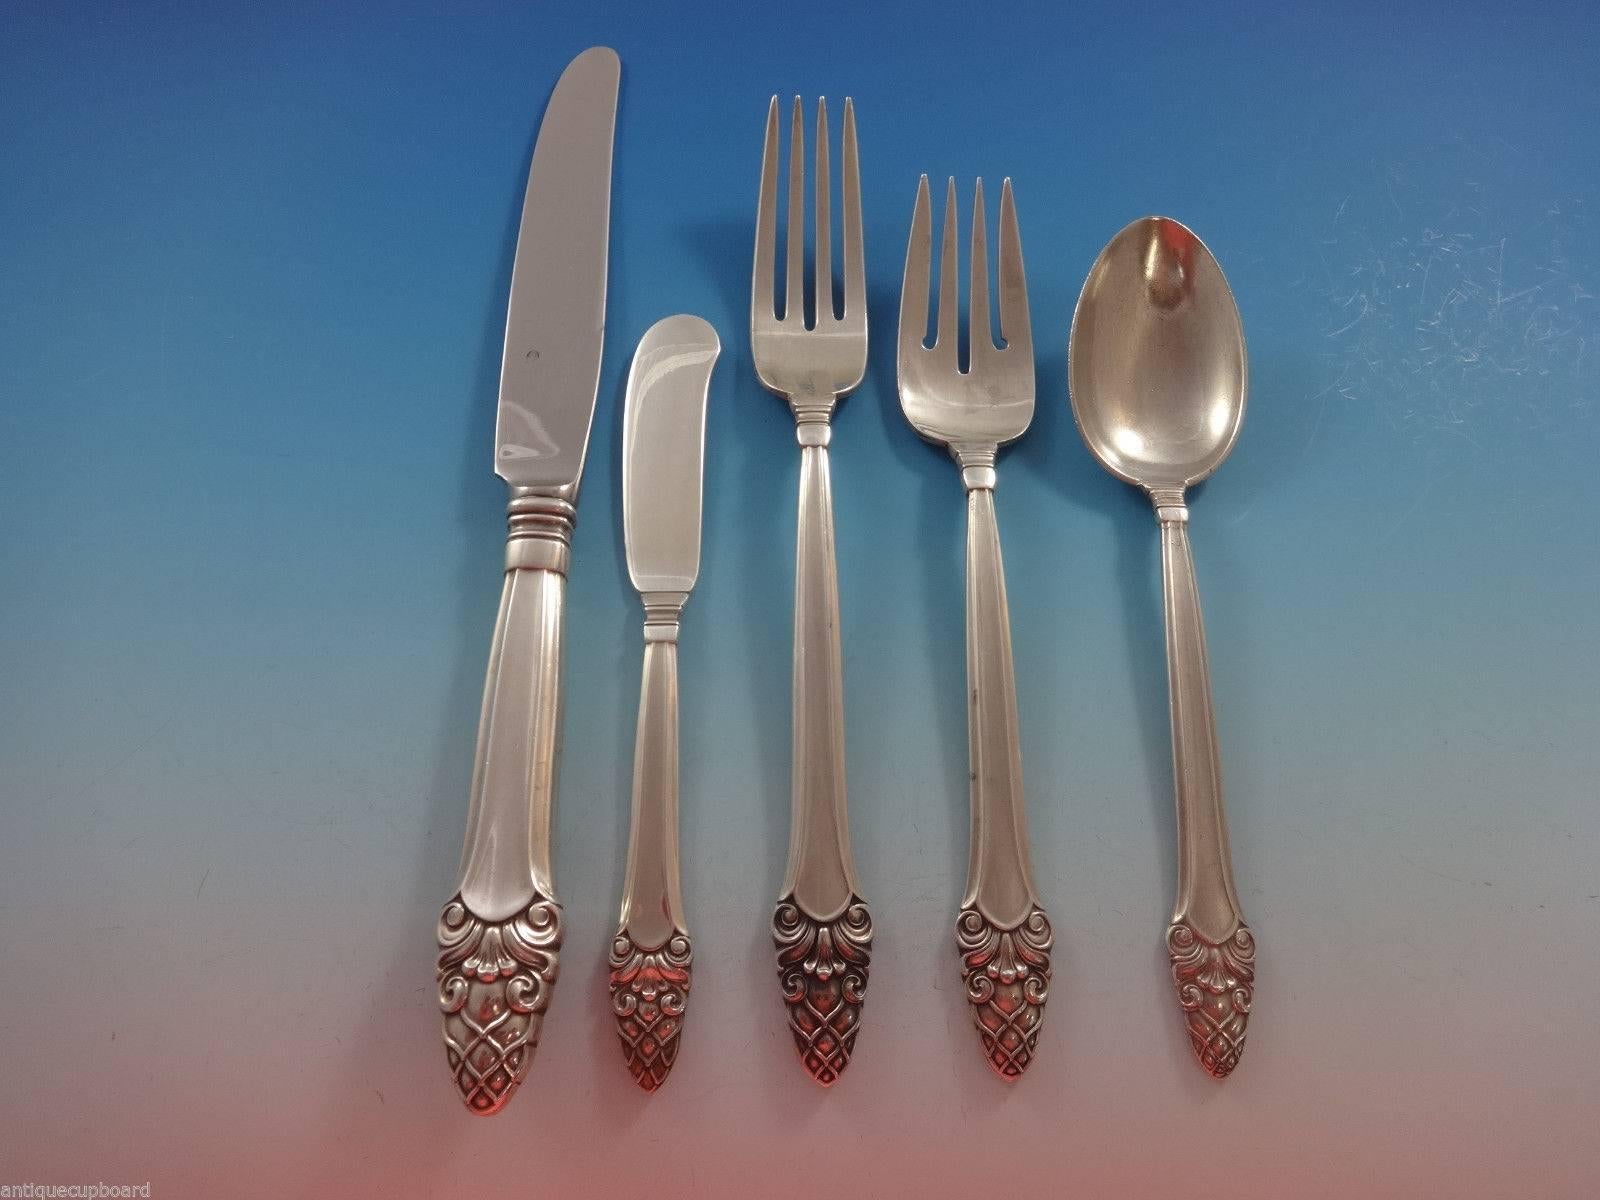 Soverign old by Gorham Sterling silver large flatware set of 42 pieces. This set includes:

Eight knives, 8 7/8